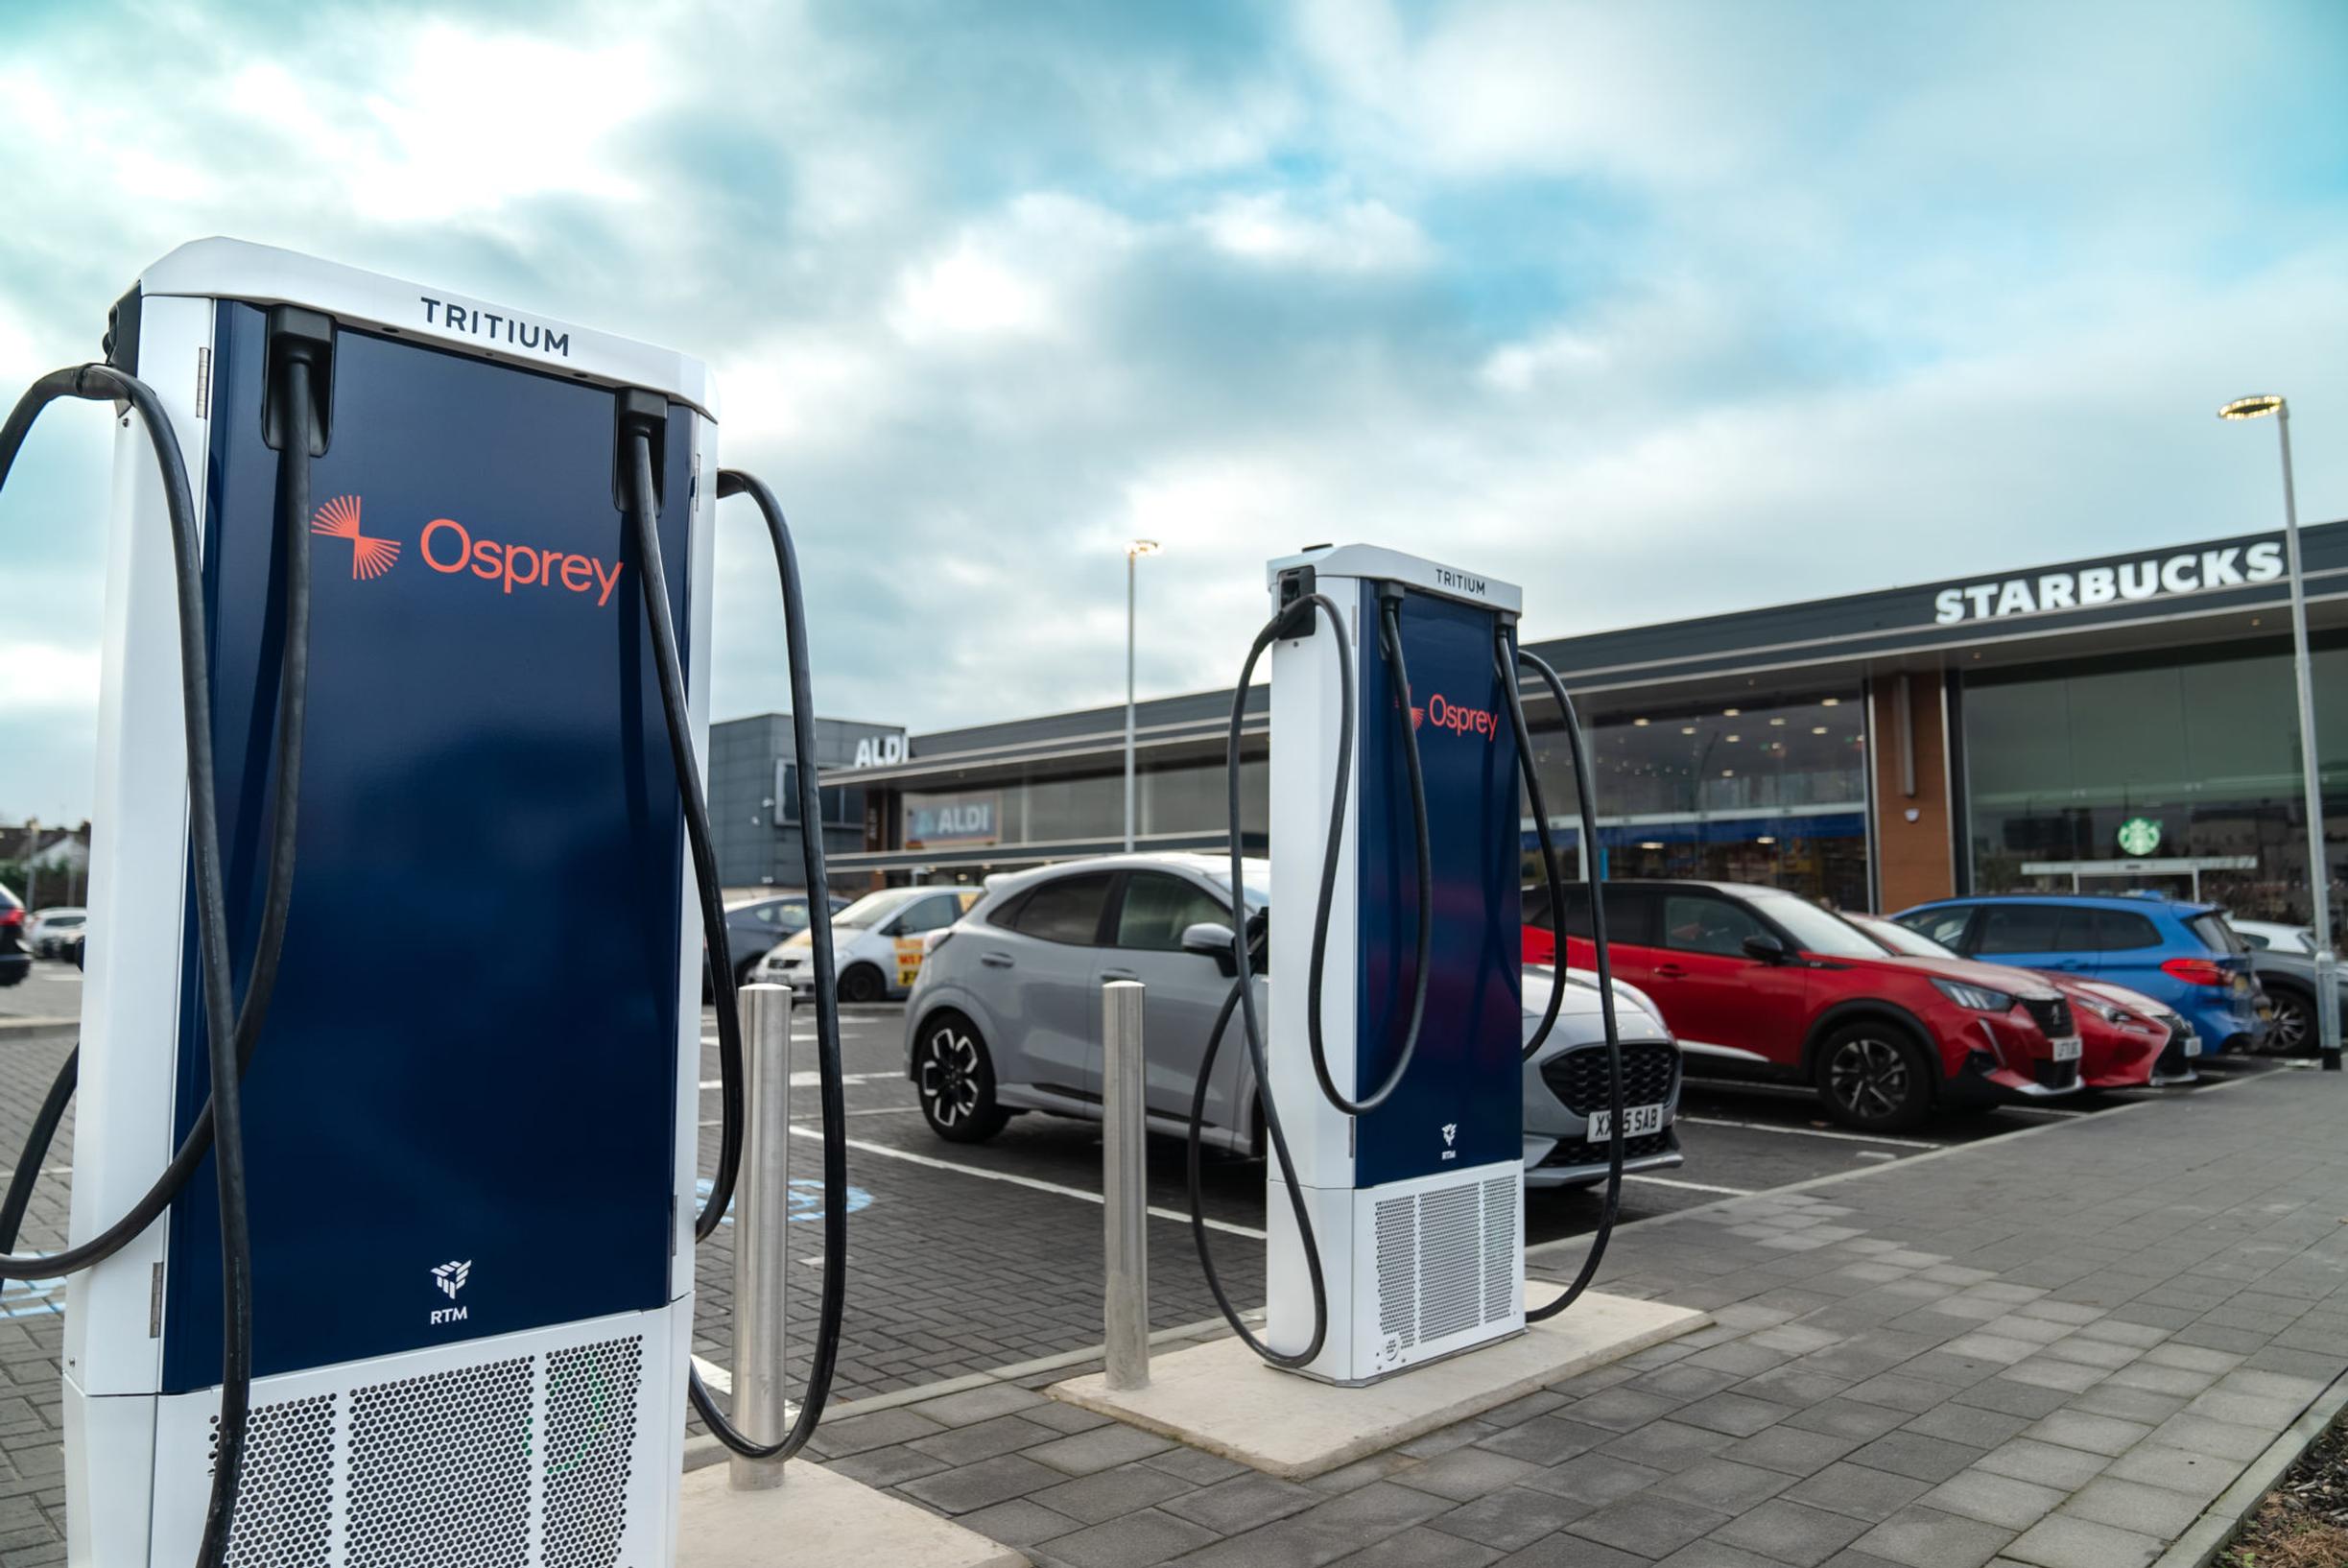 Osprey expanding network with 250 Tritium chargers